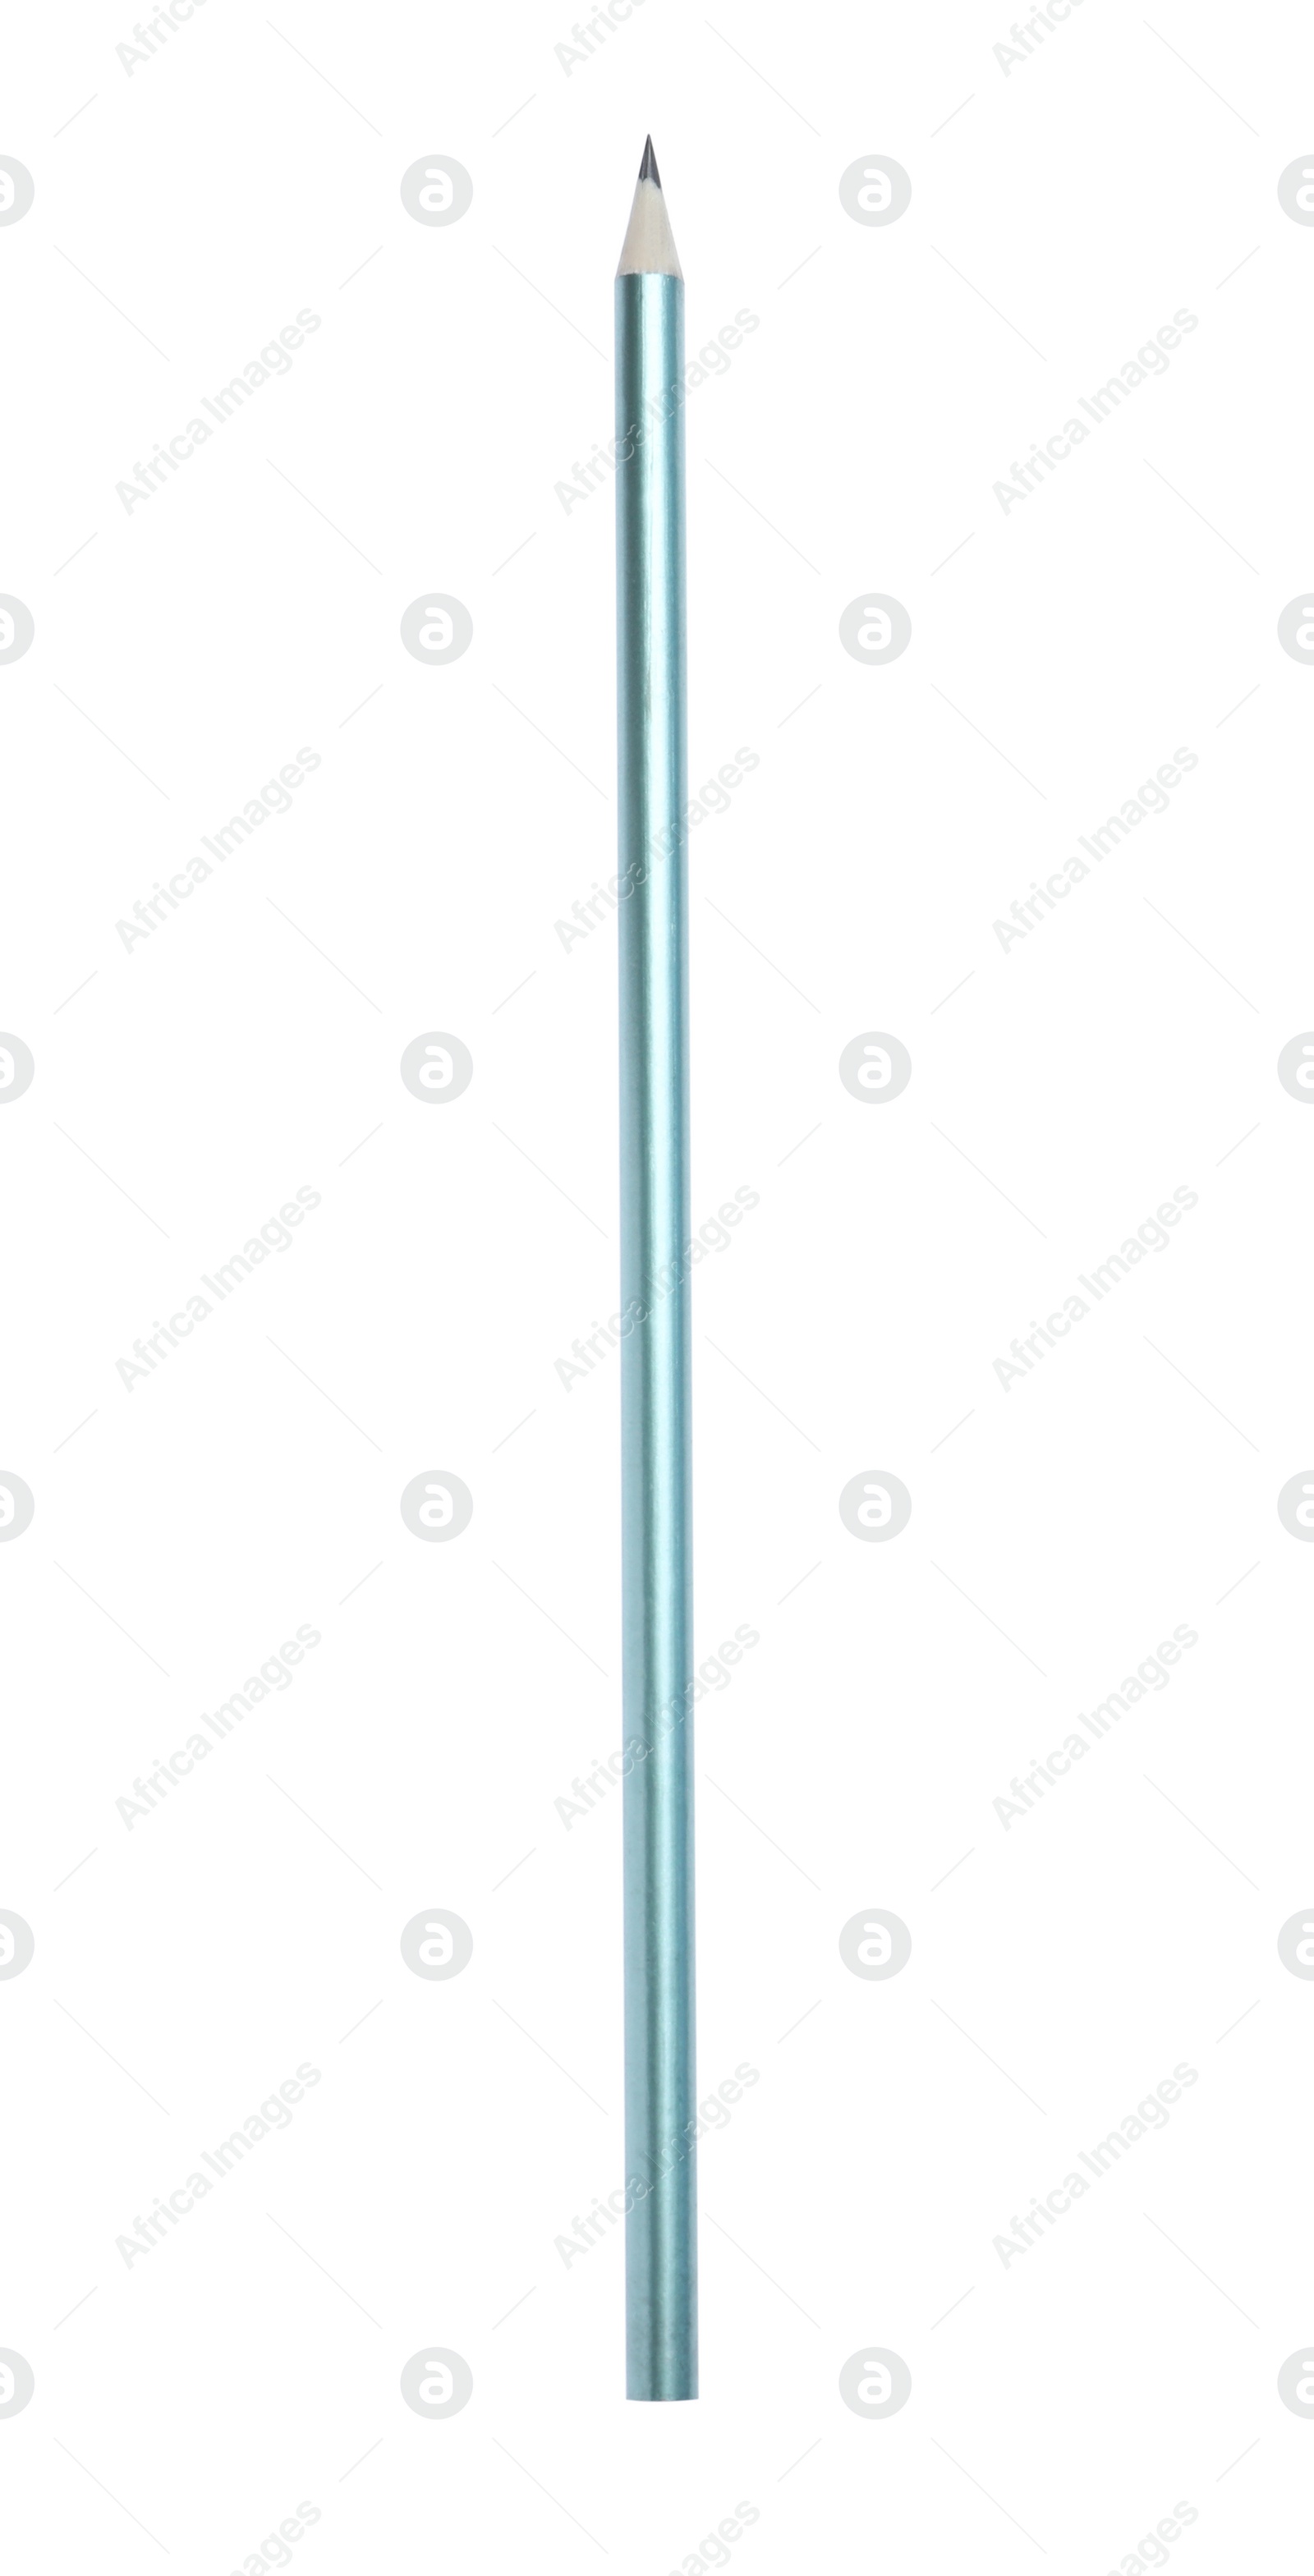 Photo of New pencil isolated on white. School stationery